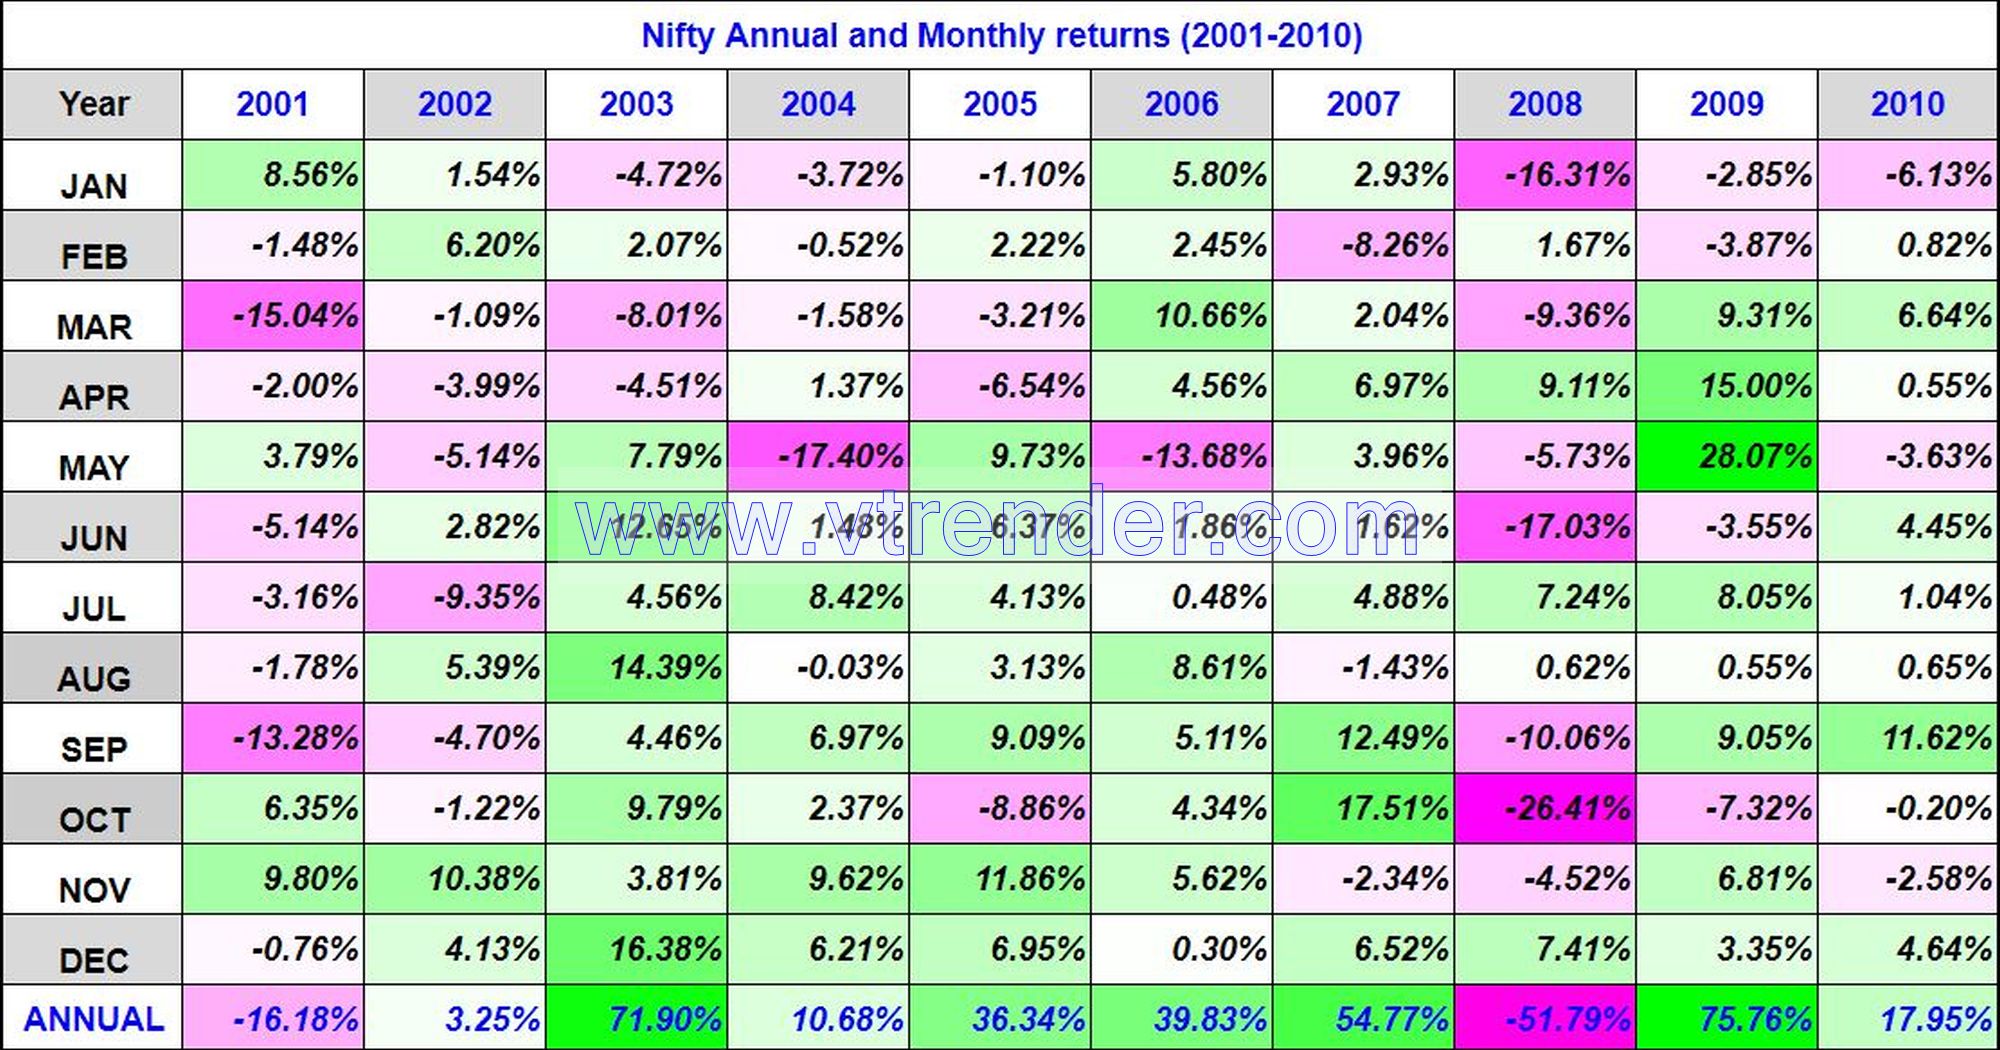 Niftyreturns2001 2010 Nifty 50 Monthly And Annual Returns (1991-2022) Updated 30Th Nov 2022 Annual, Monthly, Nifty Returns